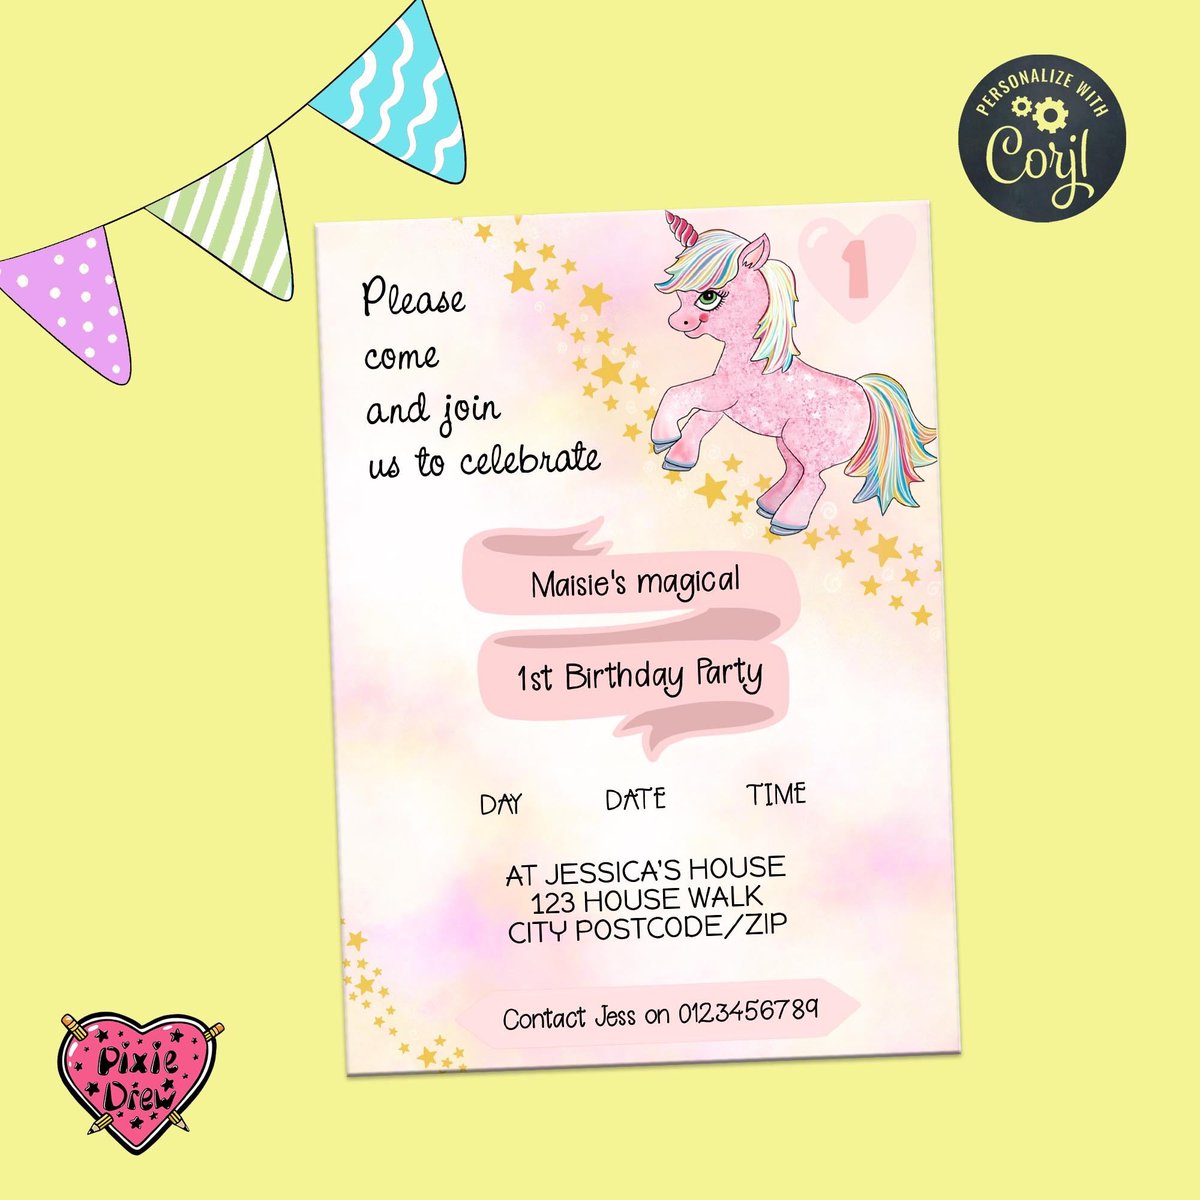 #Editable #unicorn #Birthday #partyinvitation for #children, template instant download to edit yourself with #Corjl etsy.me/3Cw7xQg